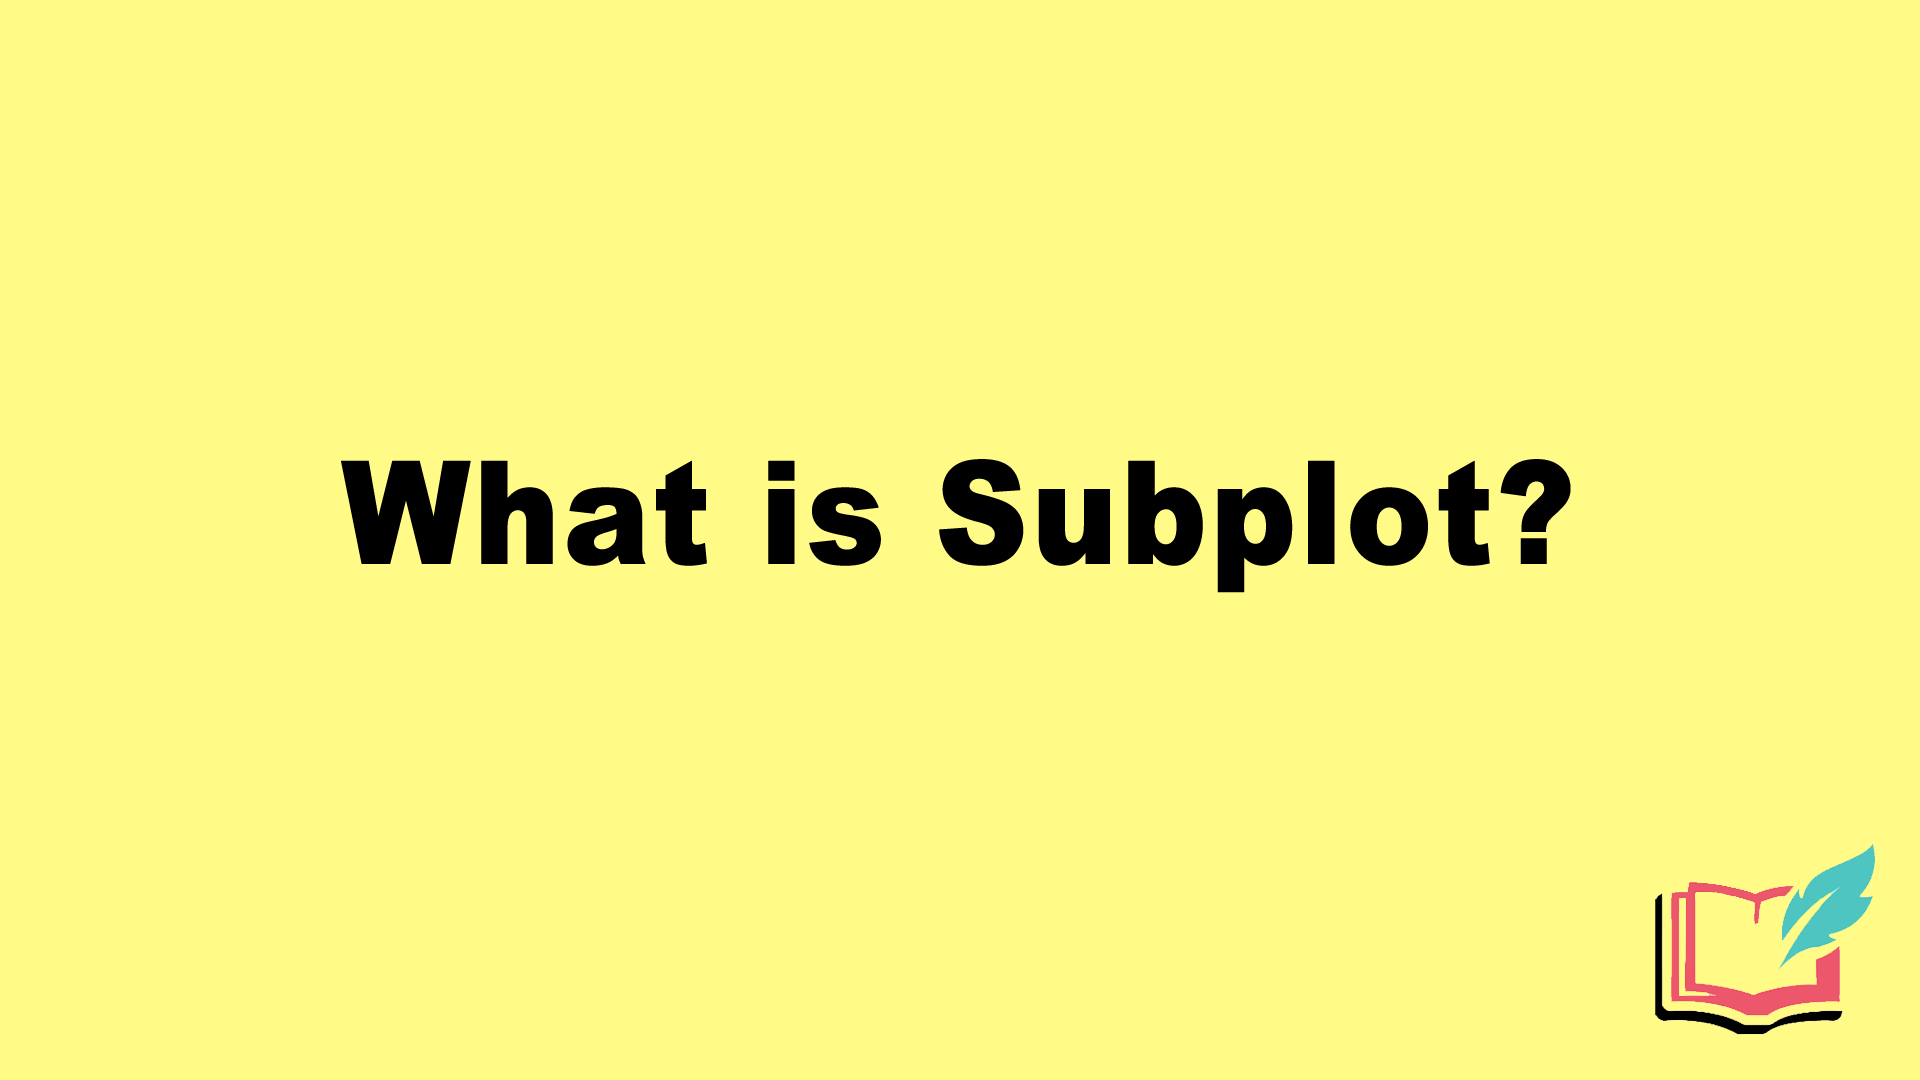 subplot meaning in english